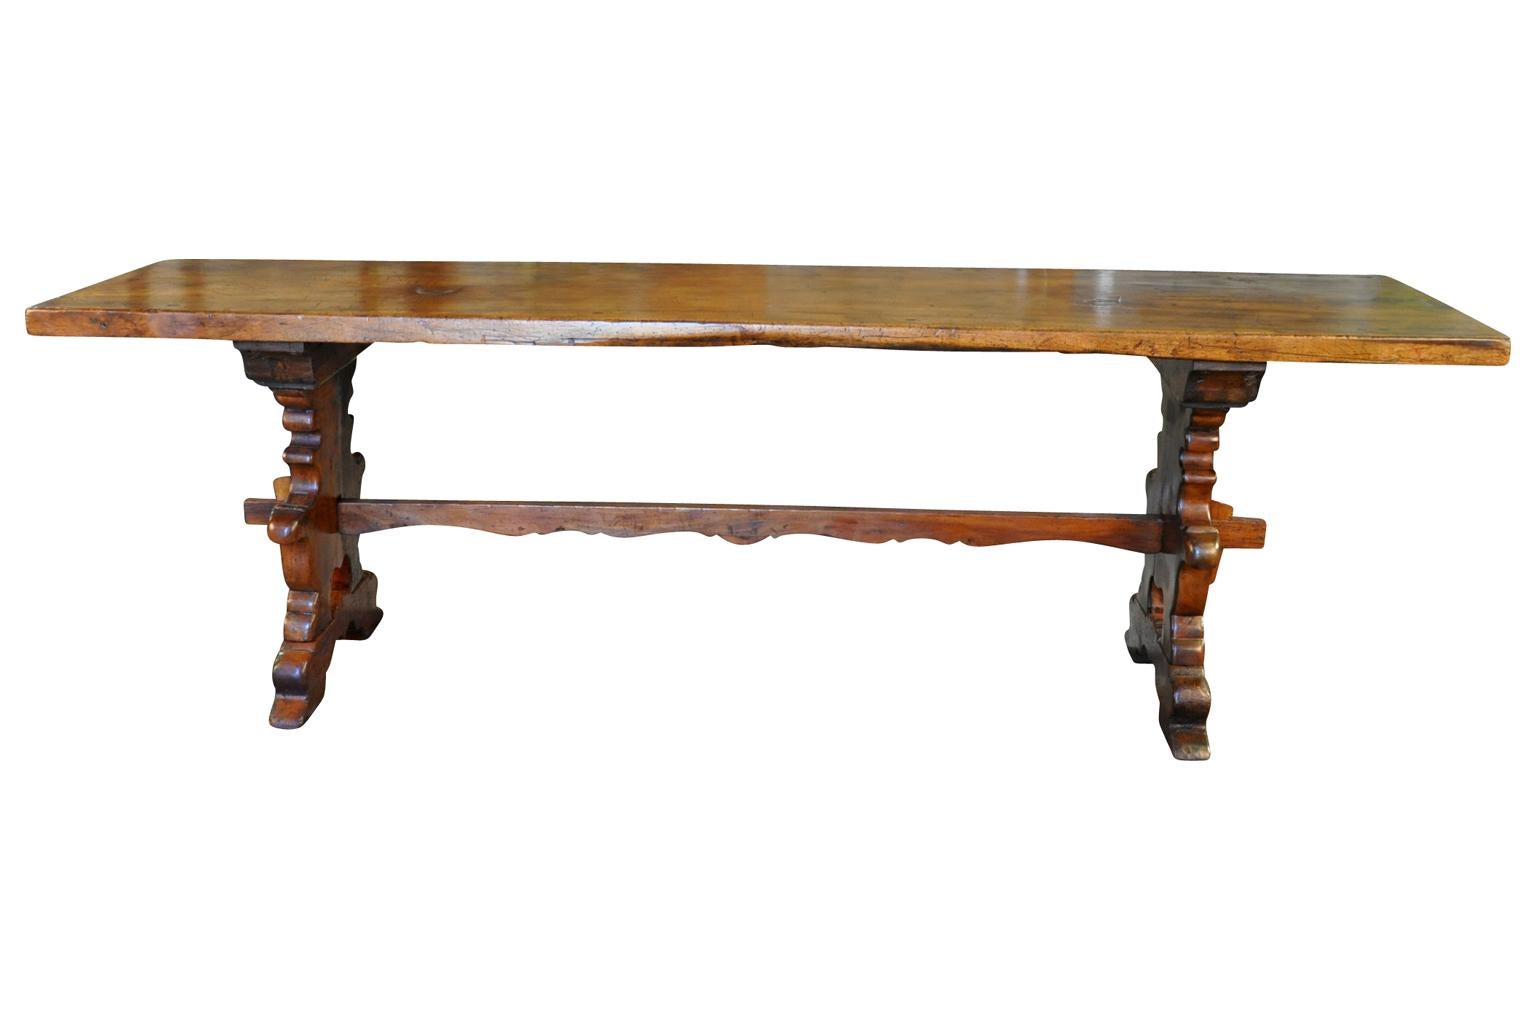 A stunning 18th century console table from Northern Italy. Wonderfully constructed from walnut with beautifully shaped legs and stretcher. The top plank is a solid board of walnut. Exceptional patina.